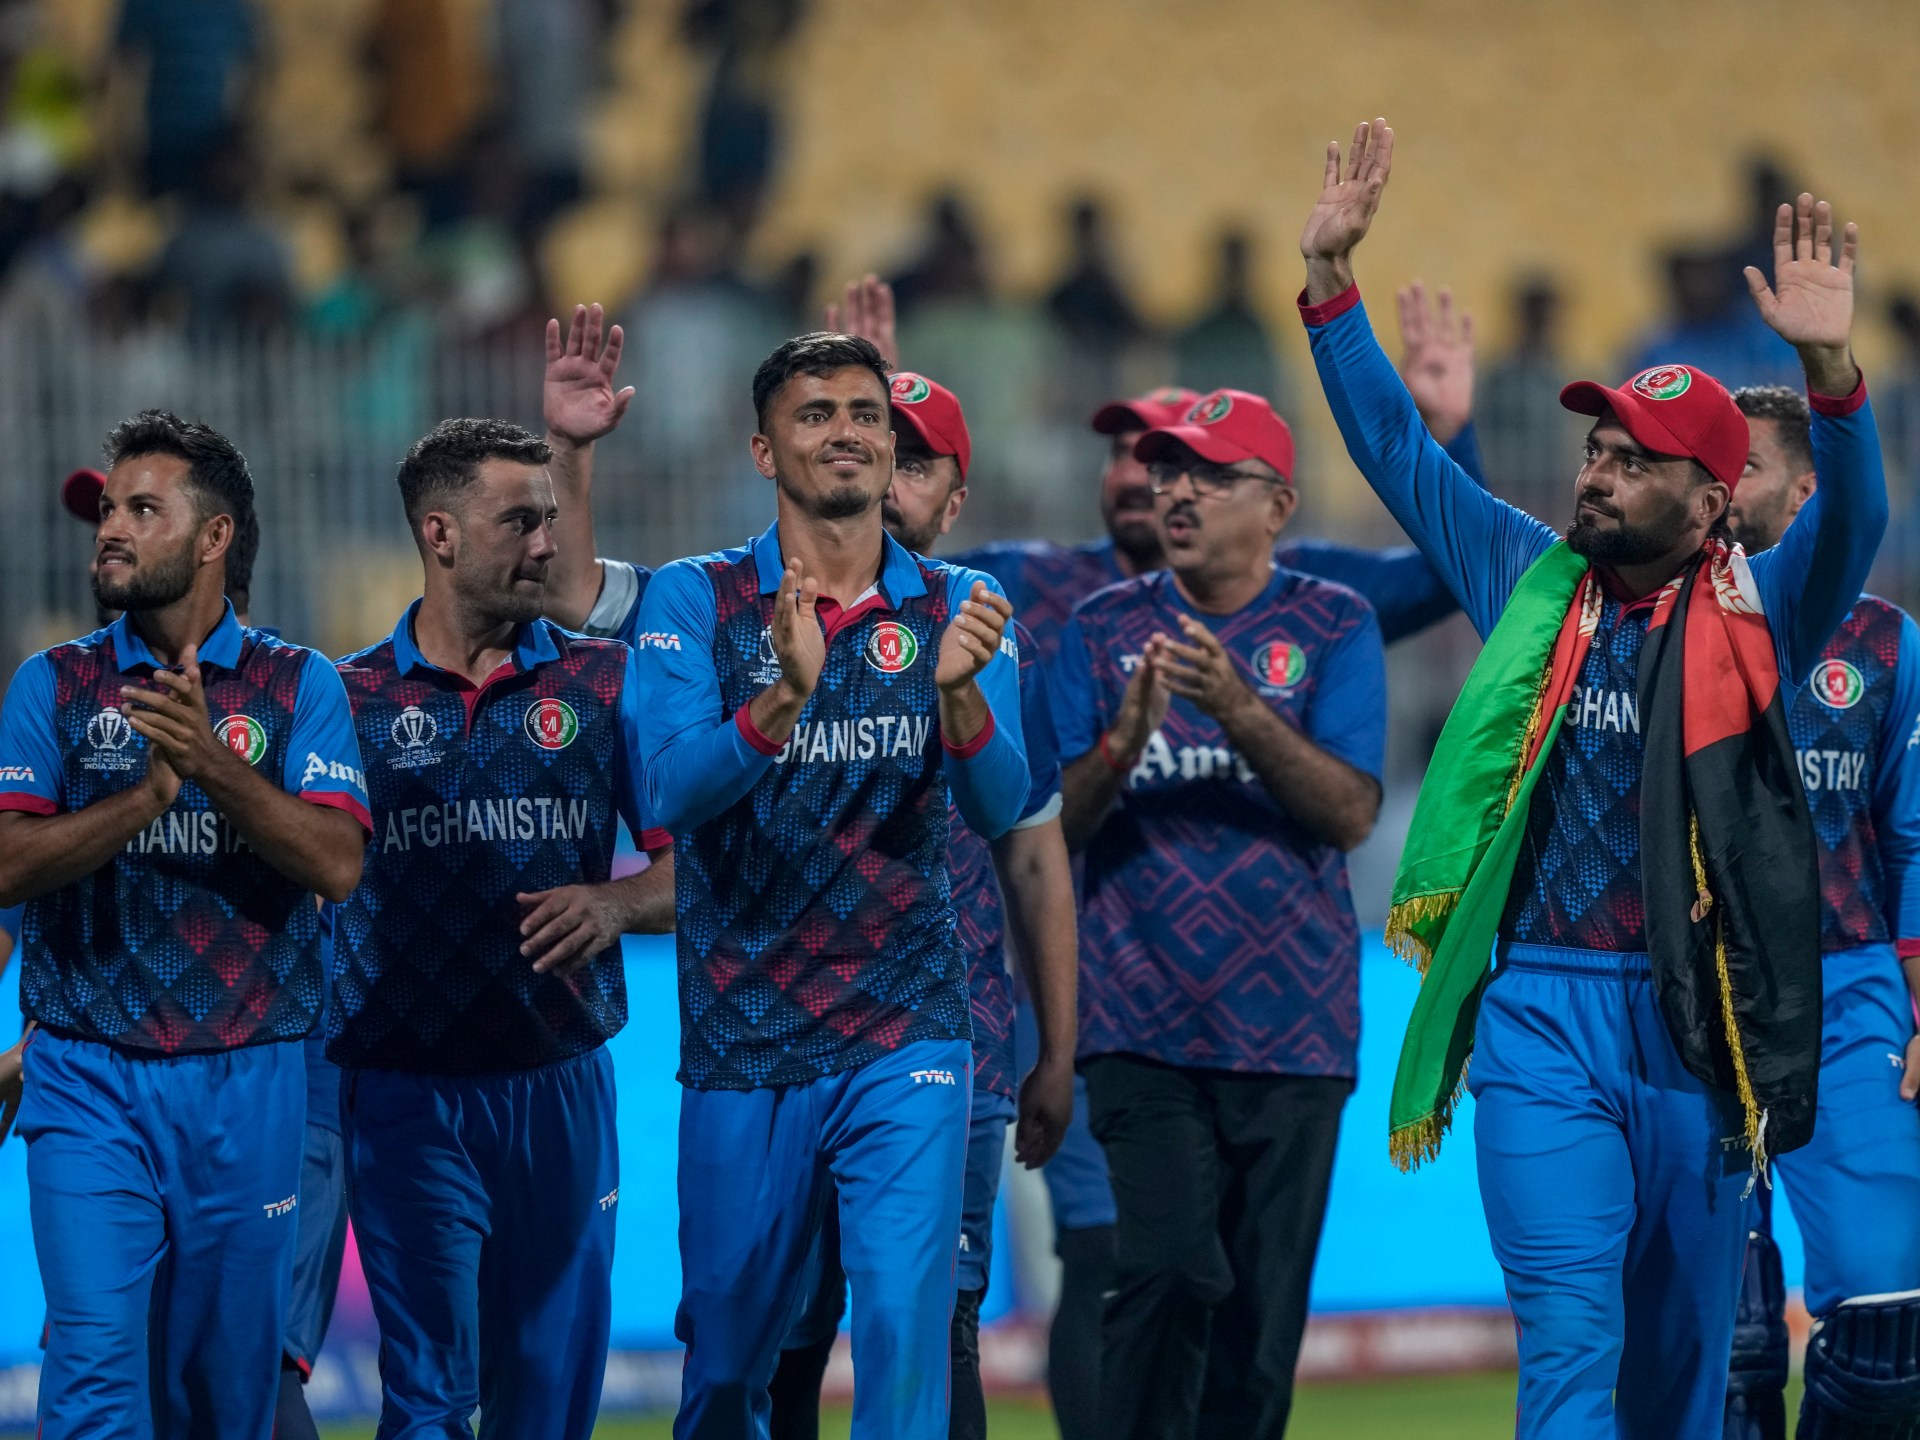 Rare public joy in Kabul after Afghanistan’s World Cup win over Pakistan | ICC Cricket World Cup News